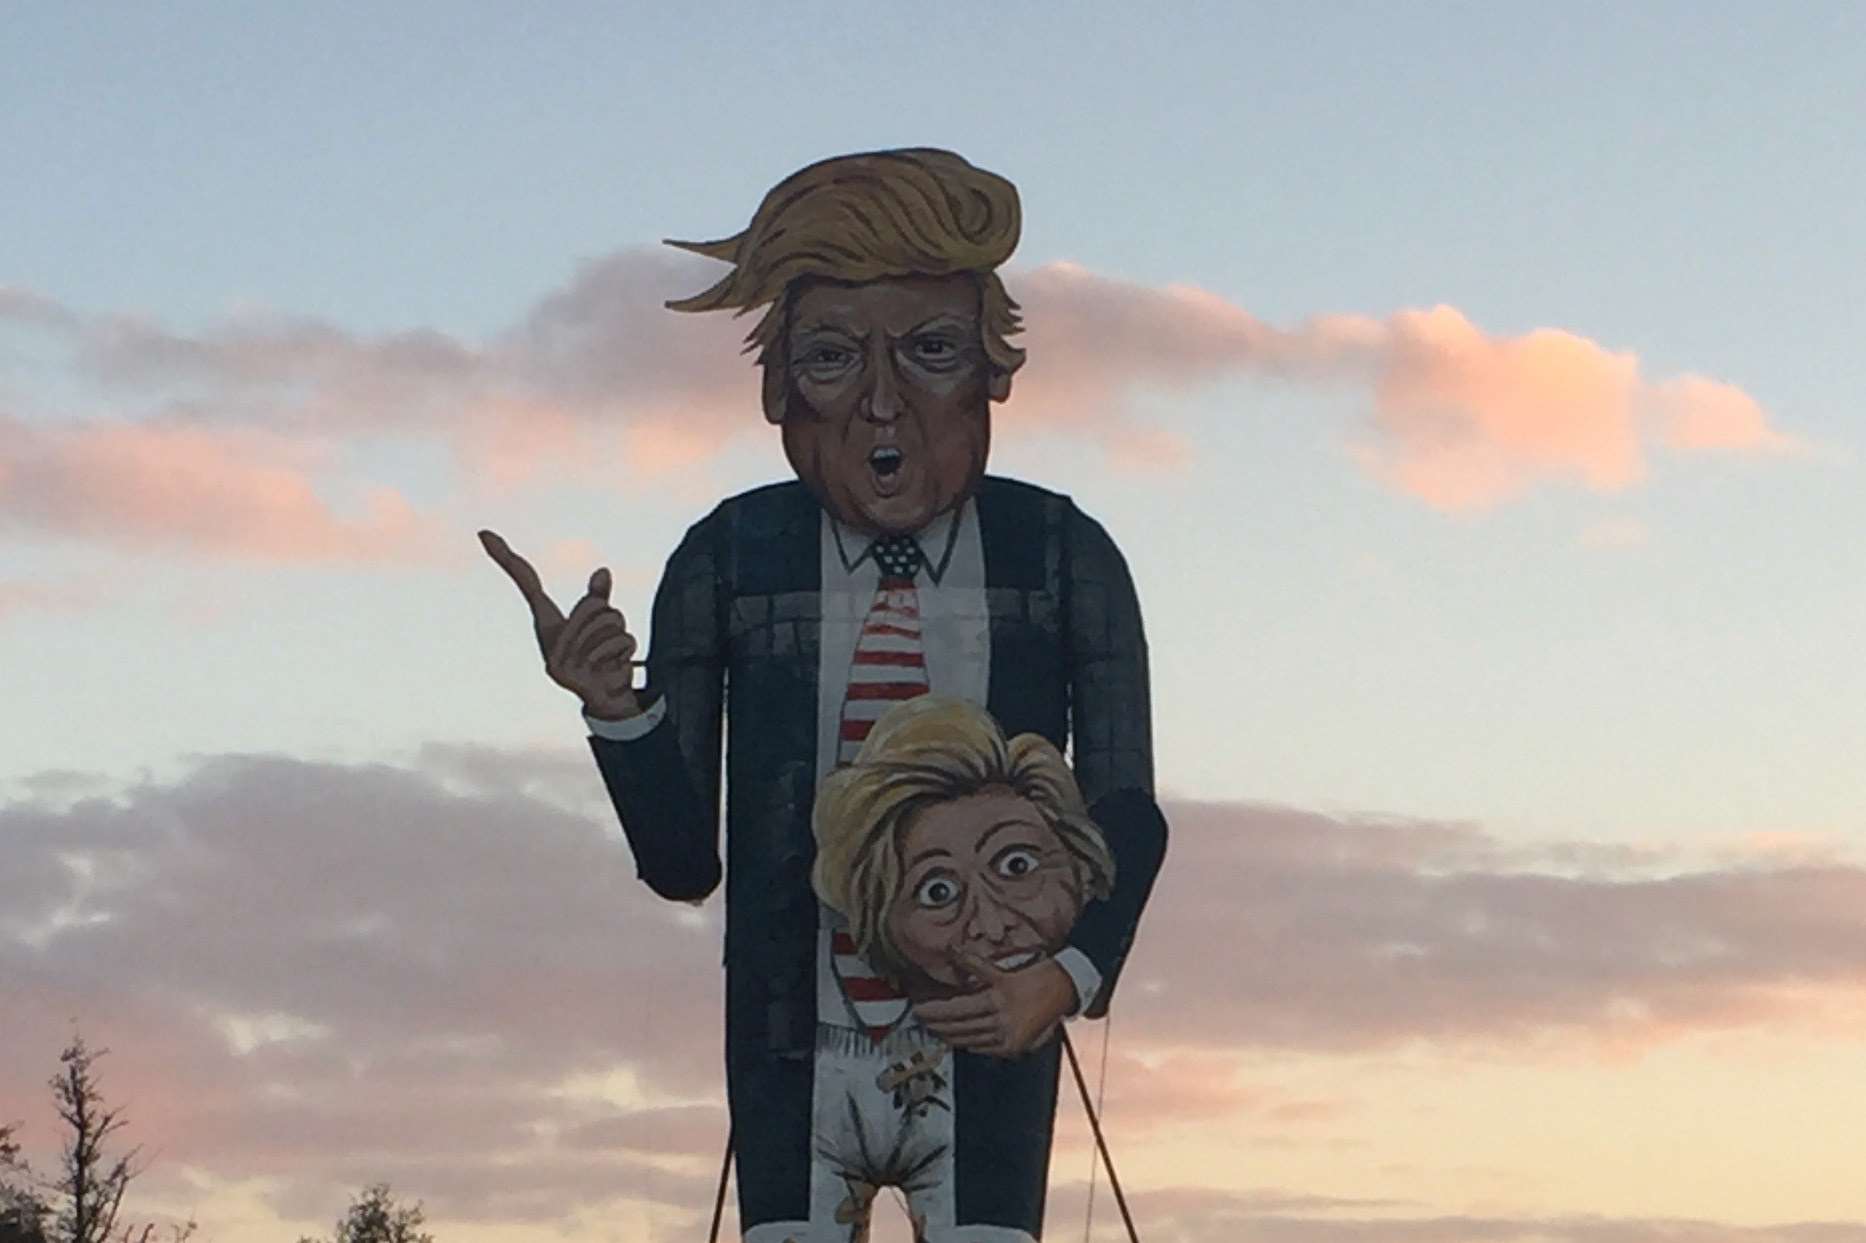 The then US presidential candidate Donald Trump was the effigy at the Edenbridge bonfire last year, holding the head of Hillary Clinton